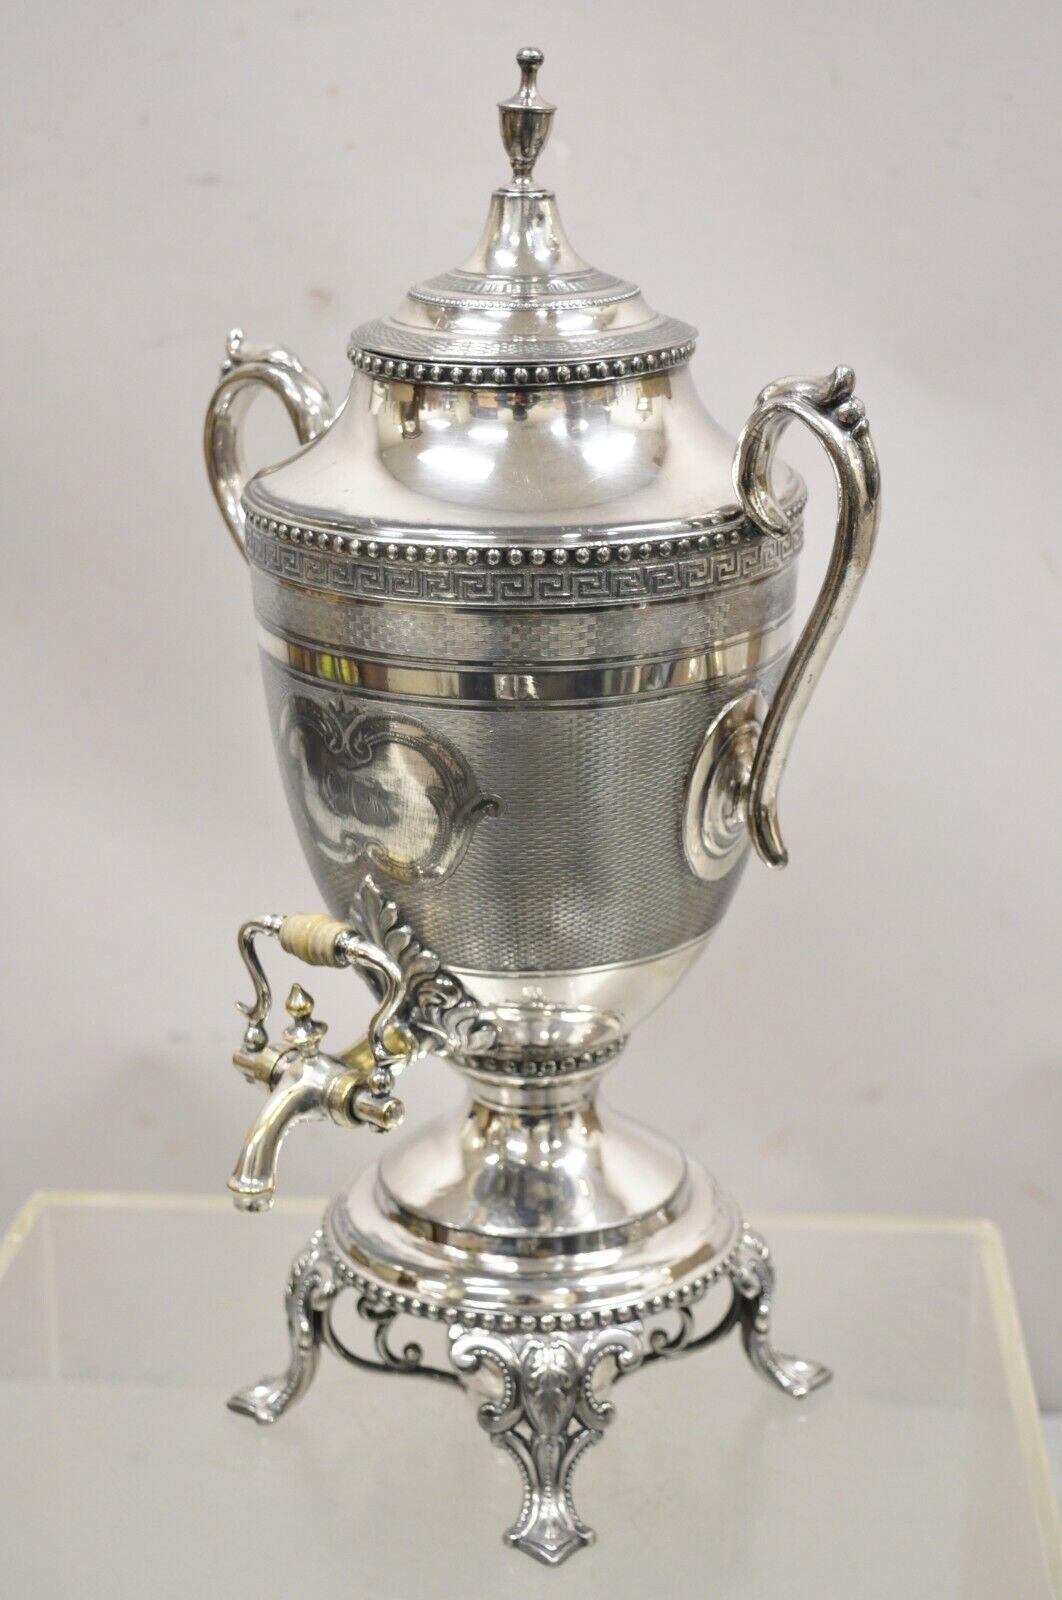 Antique English Regency Silver Plated Urn Twin Handle Coffee Drink Dispenser Samovar. Item features monogram to center (illegible), ornate twin handles, fancy feet, very nice antique item, quality English craftsmanship, great style and form. Circa